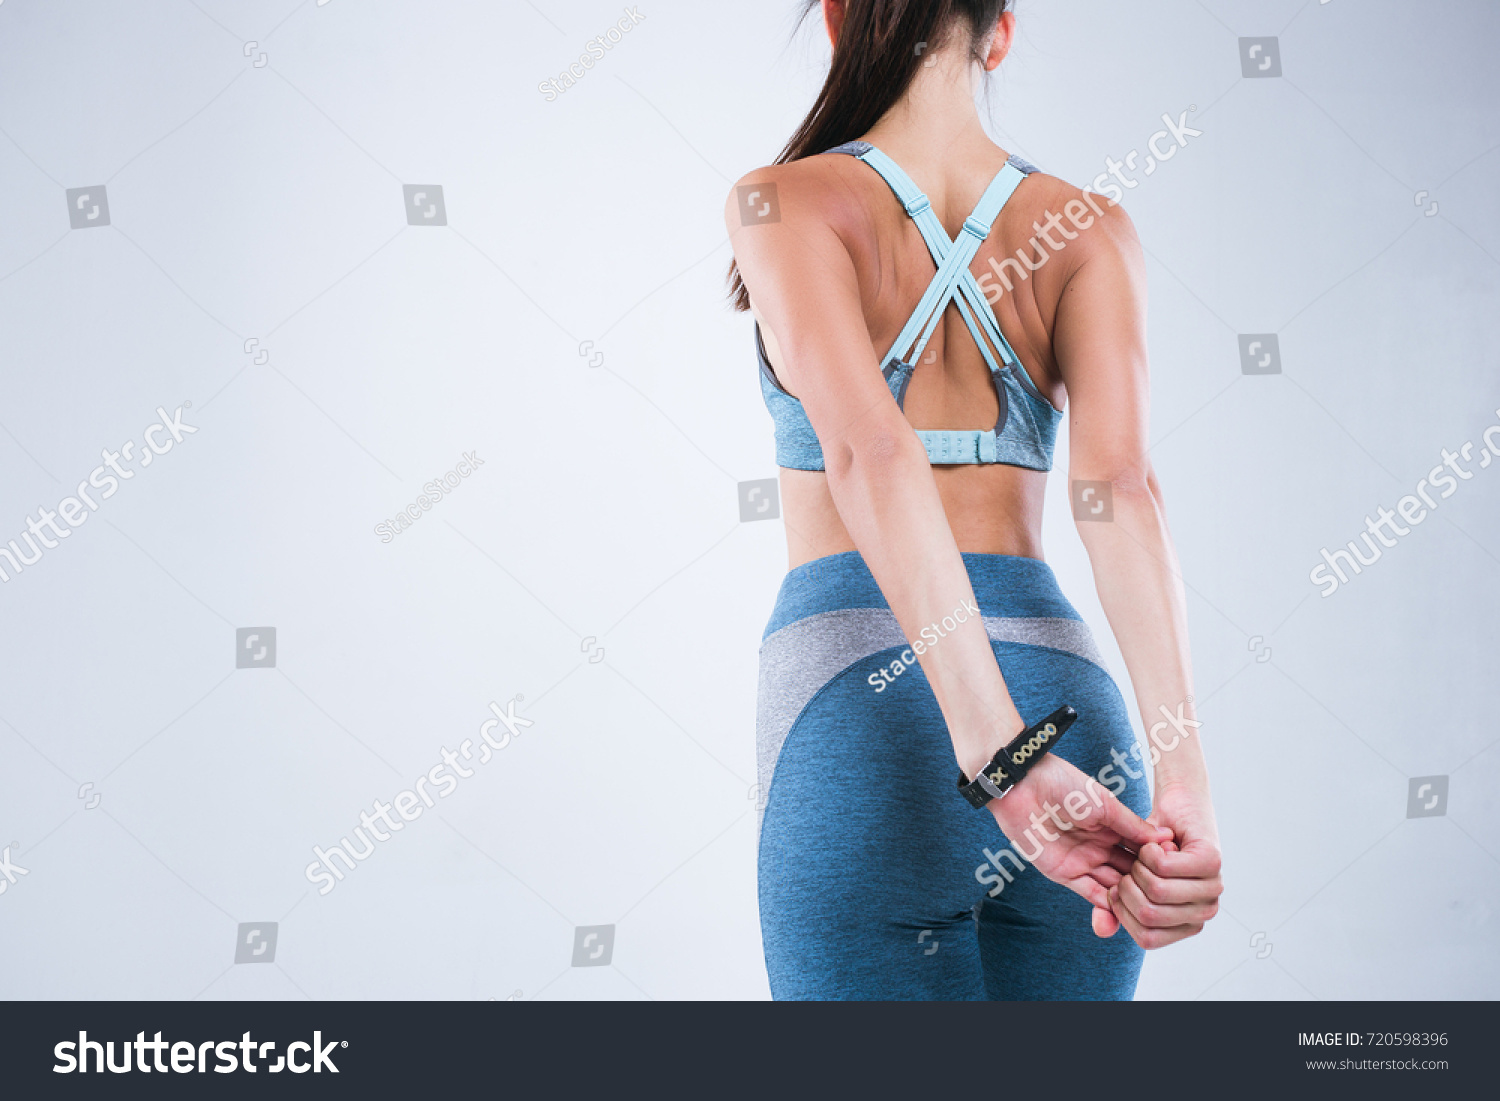 Back of beautiful fitness woman. Fitness girl do sport exercises isolated over gray background #720598396